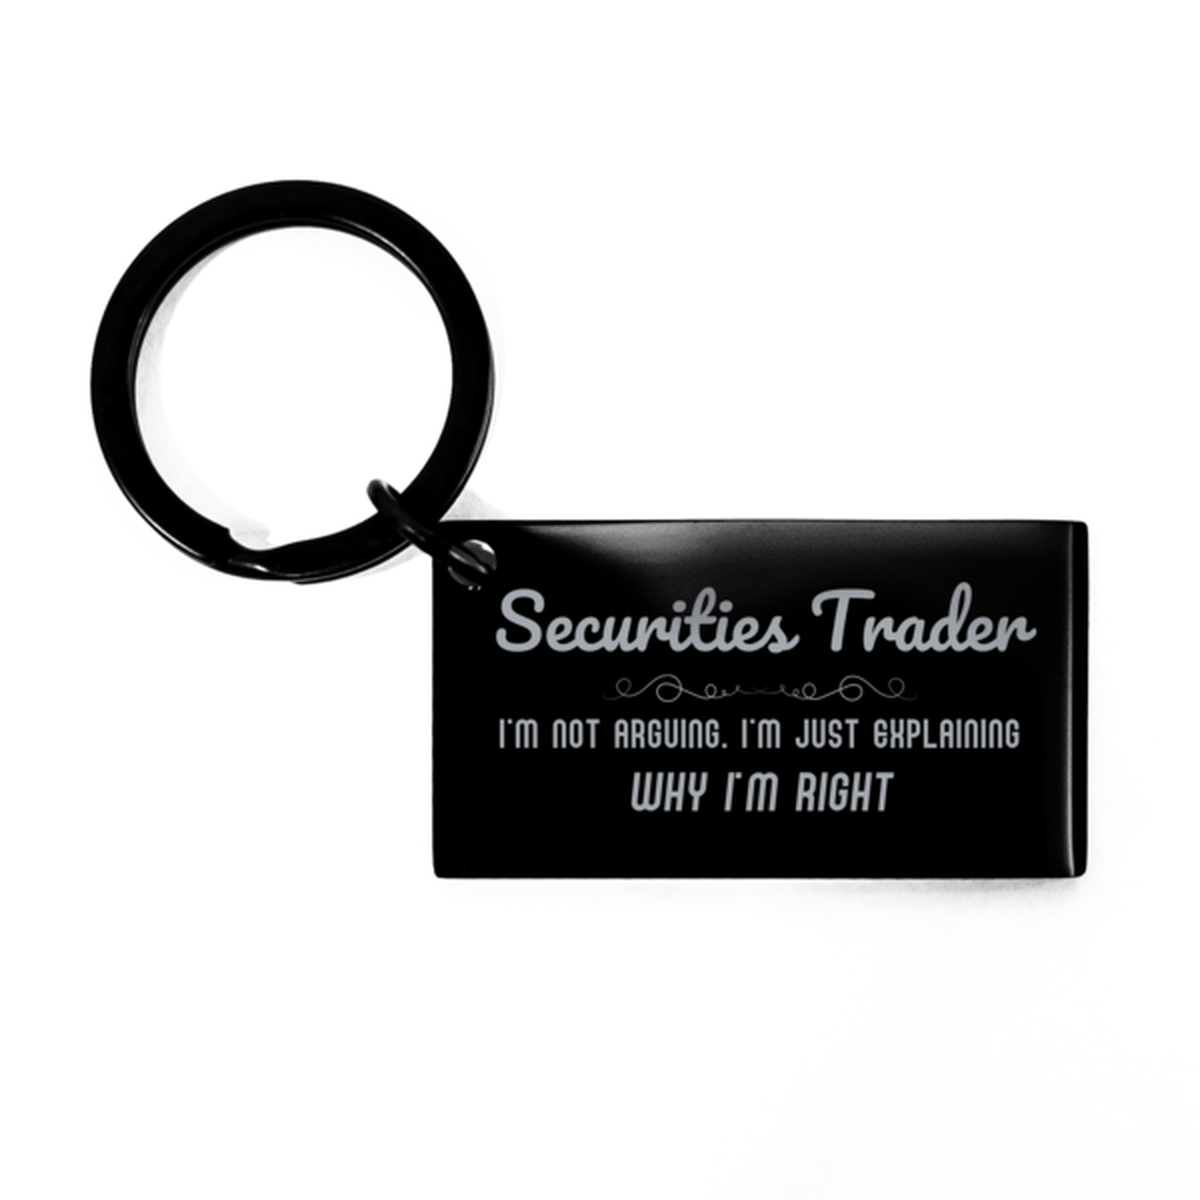 Securities Trader I'm not Arguing. I'm Just Explaining Why I'm RIGHT Keychain, Funny Saying Quote Securities Trader Gifts For Securities Trader Graduation Birthday Christmas Gifts for Men Women Coworker